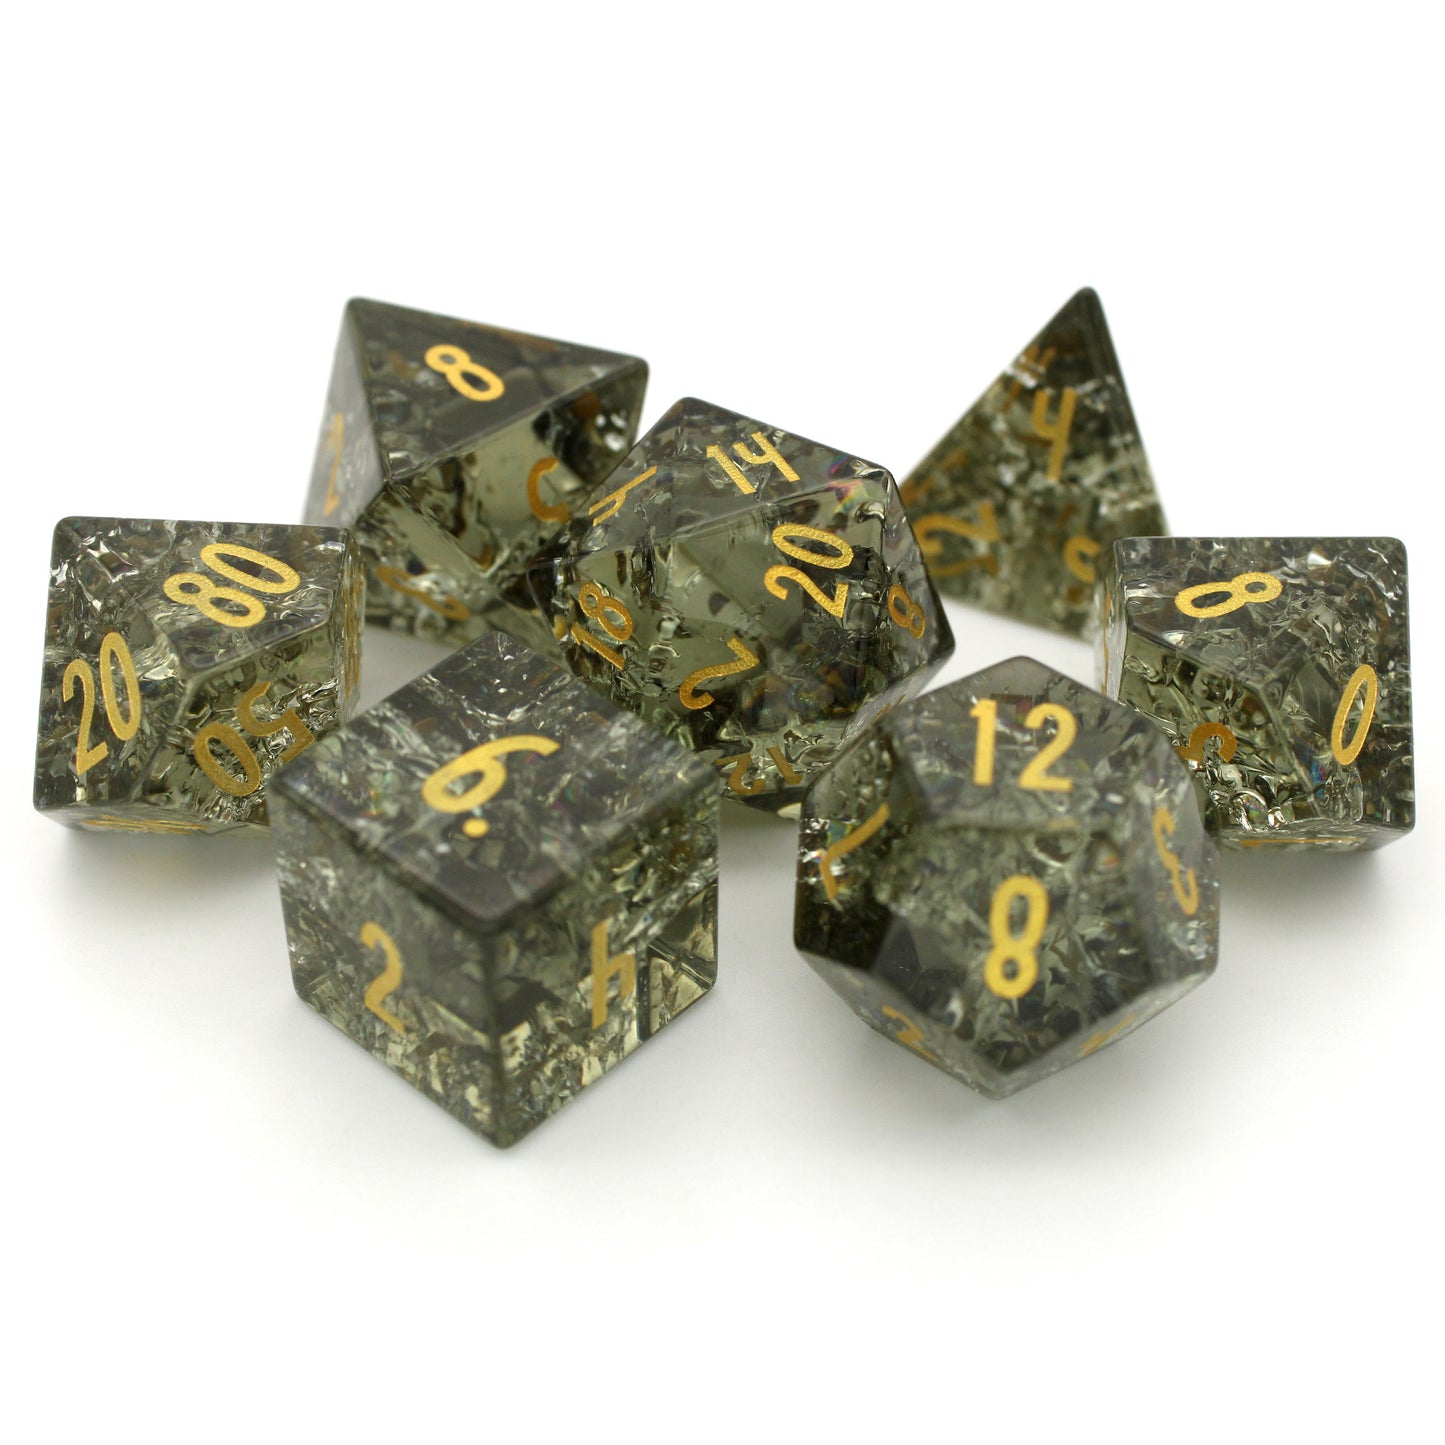 Circle Of Spores is a 7-piece, mossy green crystal set inked in gold.